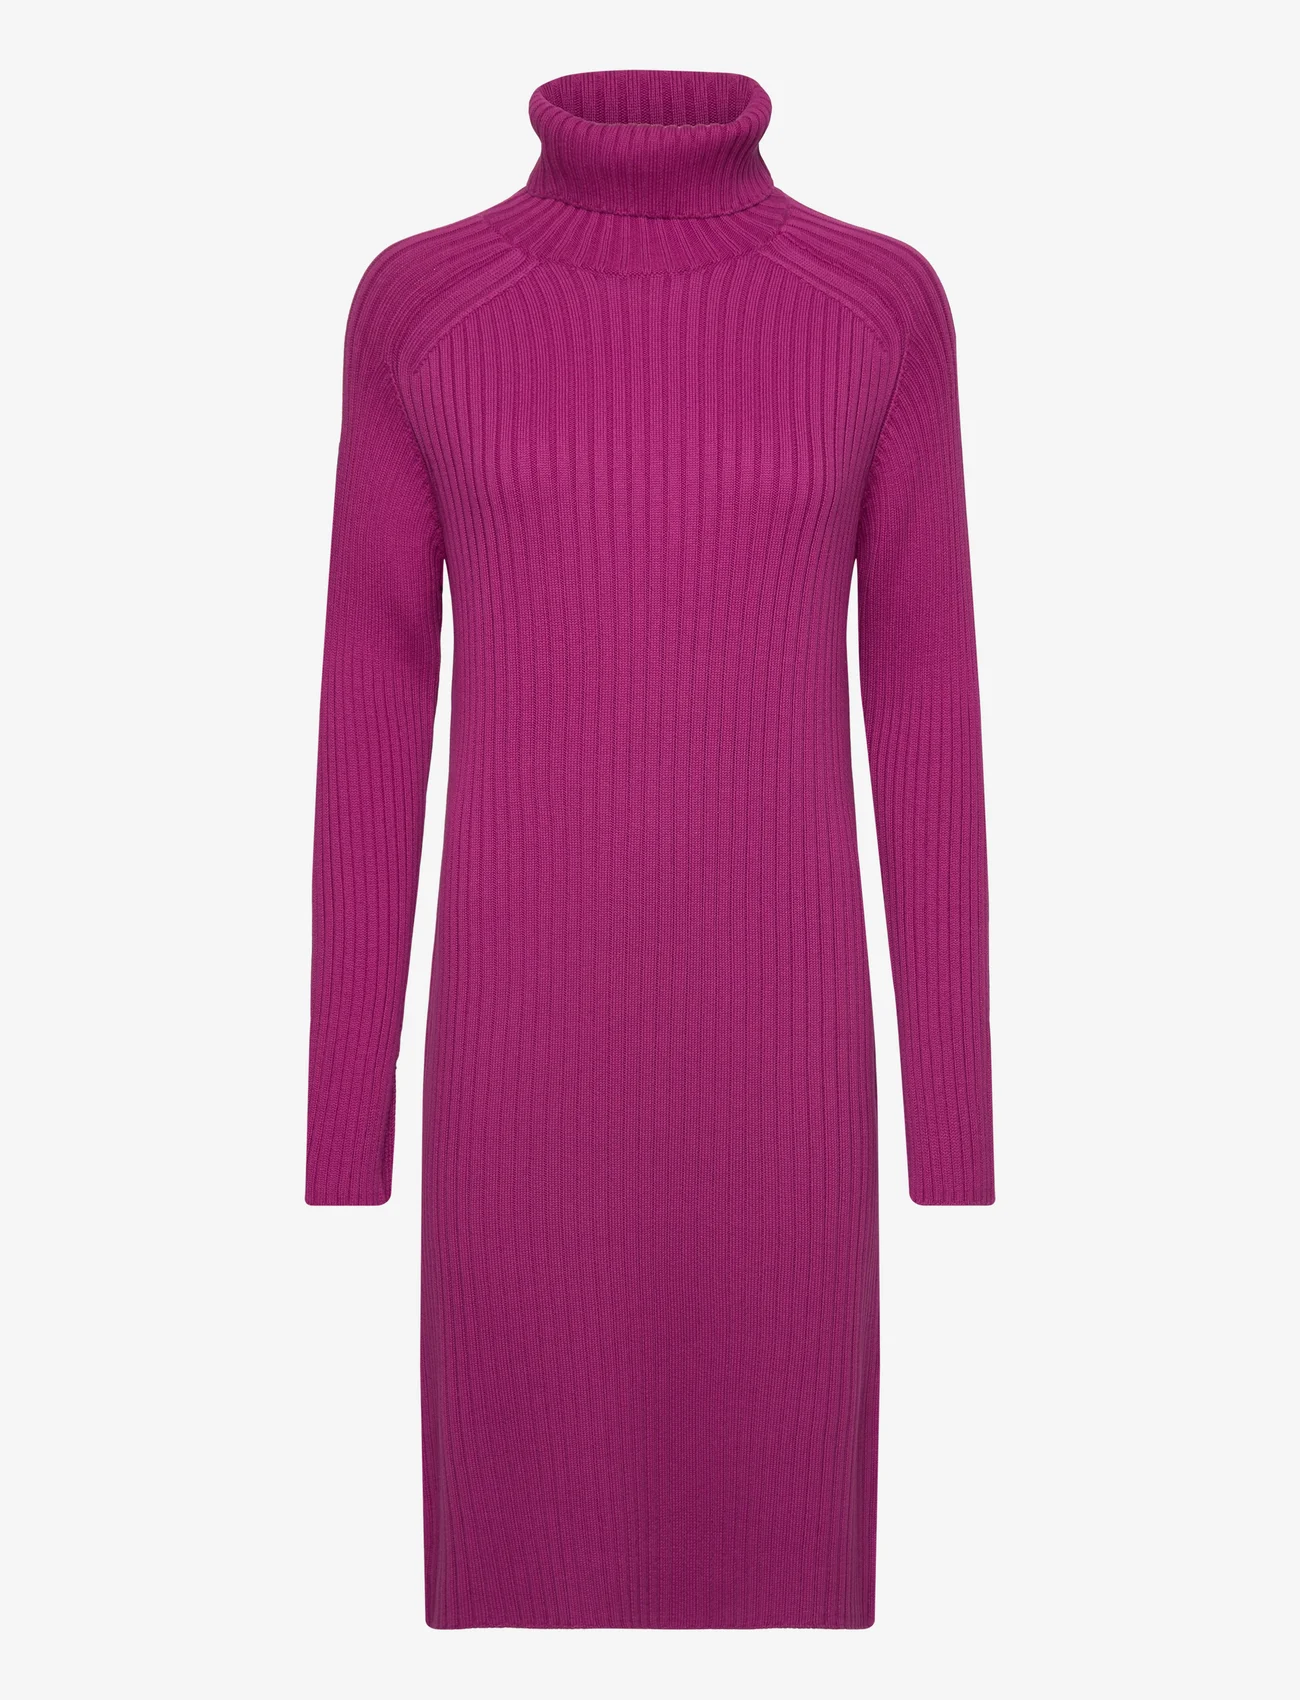 Marc O'Polo - HEAVY KNIT DRESSES - strikkjoler - juicy berry - 0